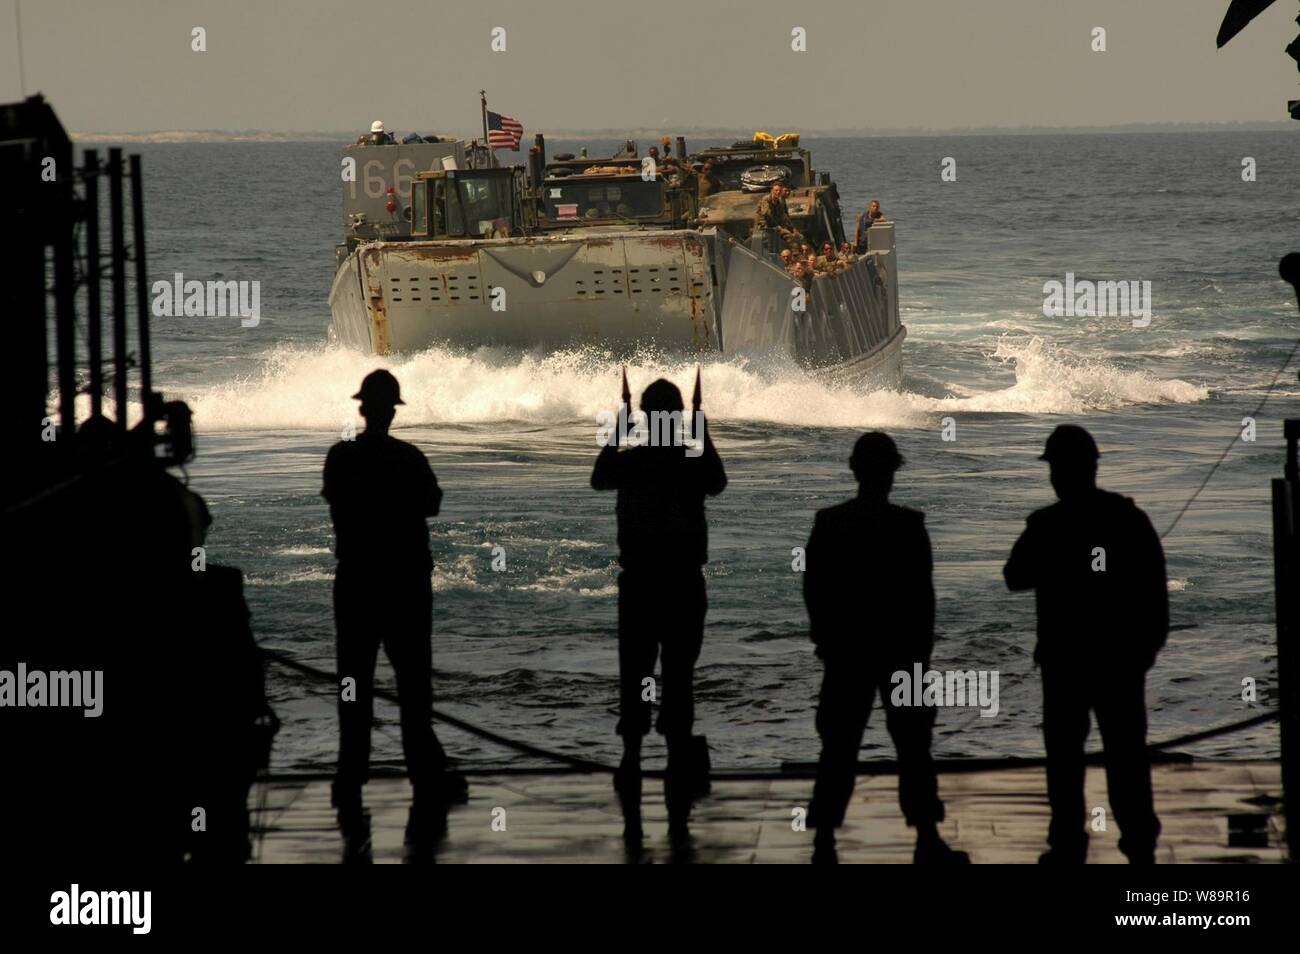 U.S. Navy Landing Craft Unit 1664 makes it's approach towards the well deck of the USS Nassau (LHA 4) as the ship operates in the Atlantic Ocean on June 27, 2005.  The craft is carrying U.S. Marines and their equipment from the 22nd Marine Expeditionary Unit.  The USS Nassau is a Tarawa class amphibious assault ship home ported in Norfolk, Va. Stock Photo